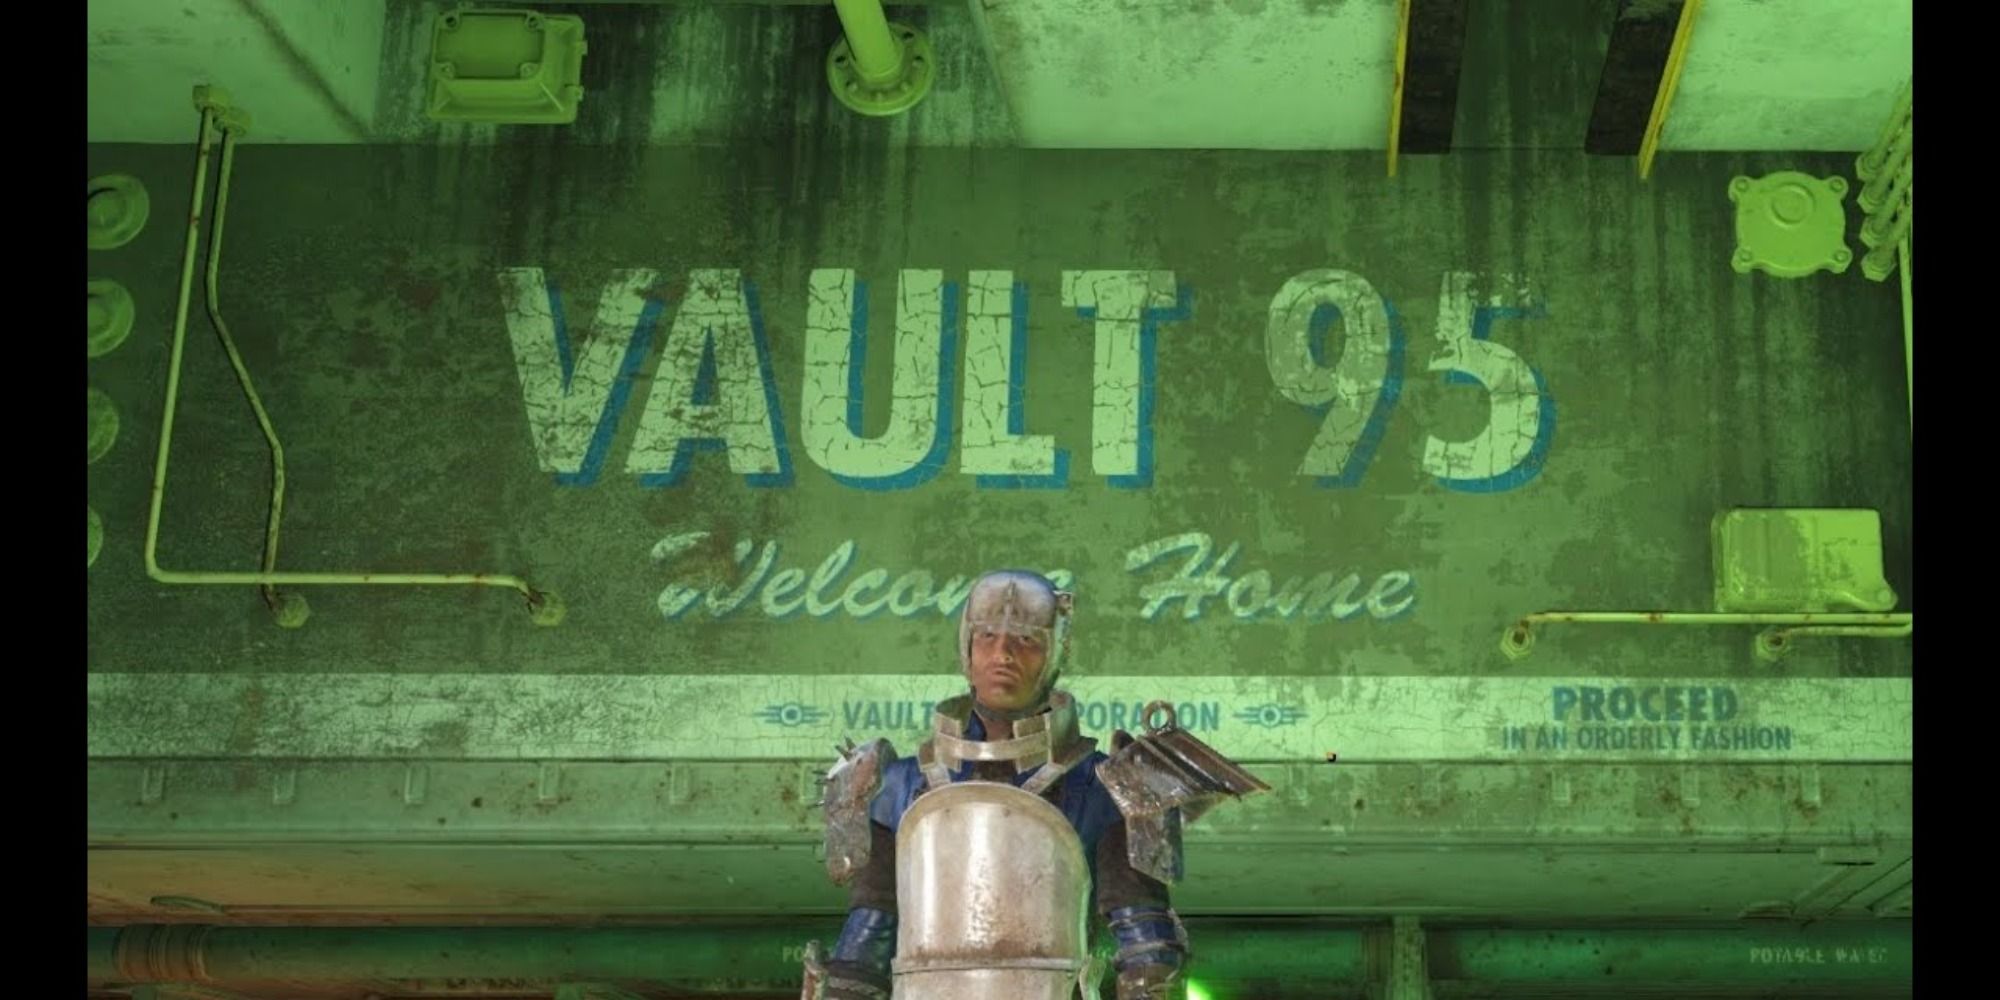 Vault 95 entrance sign with player character via Fallout 4